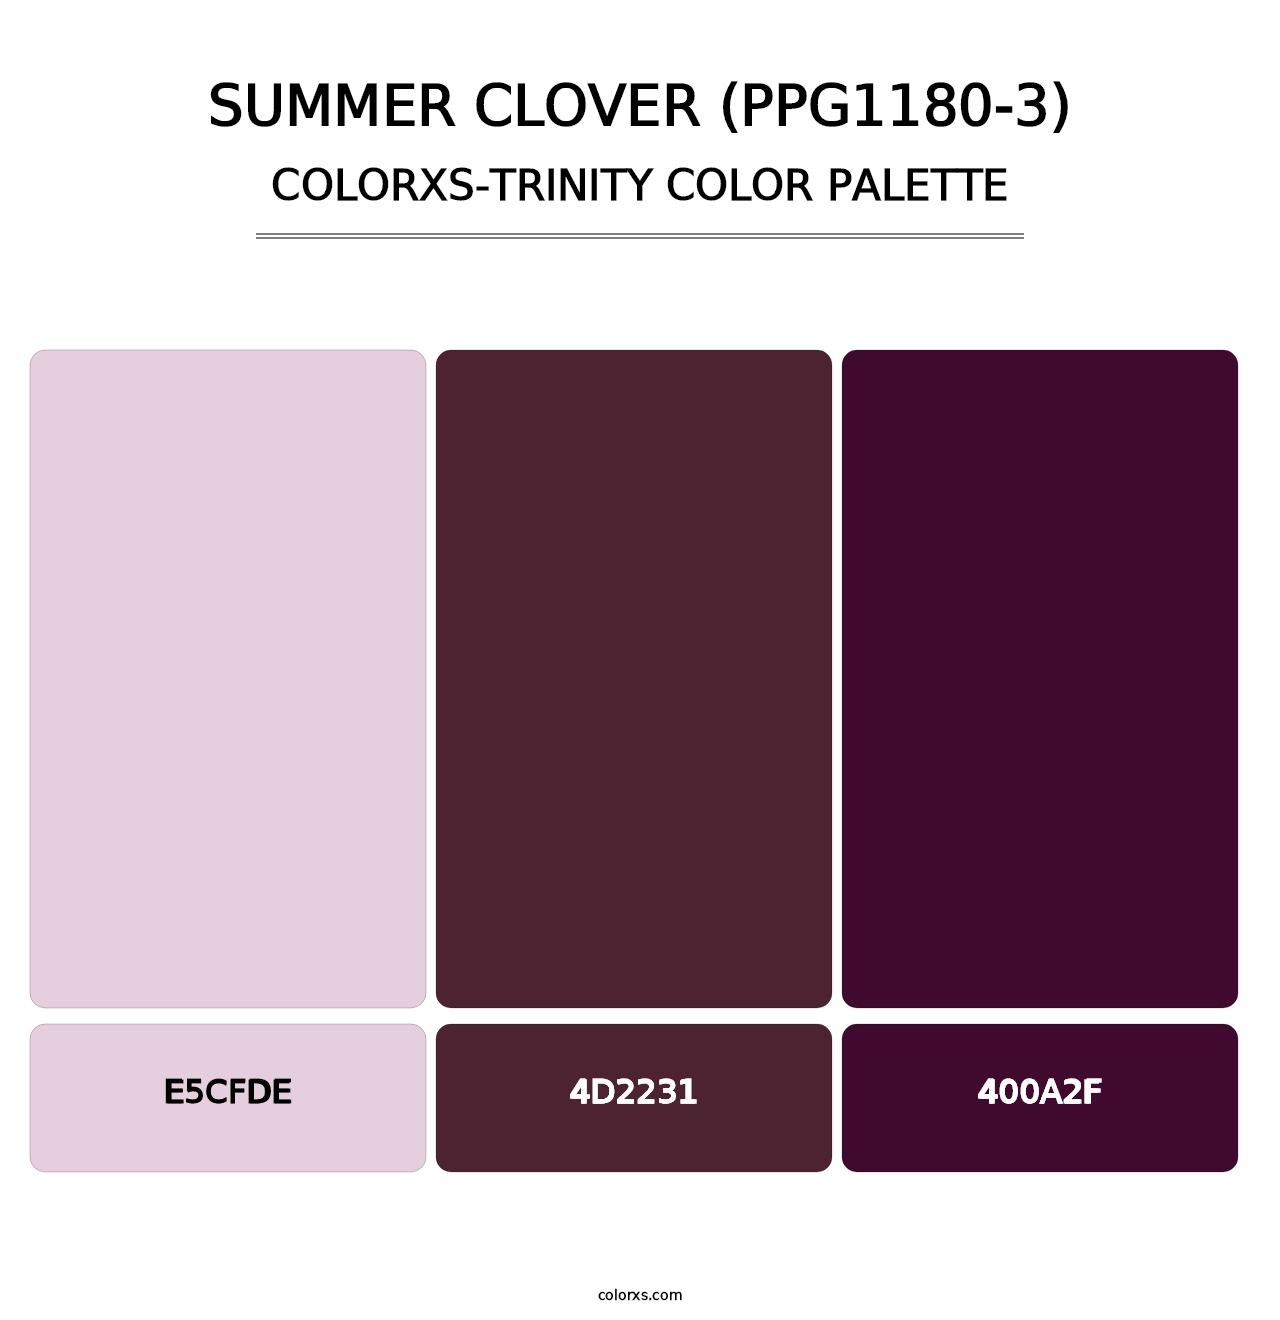 Summer Clover (PPG1180-3) - Colorxs Trinity Palette